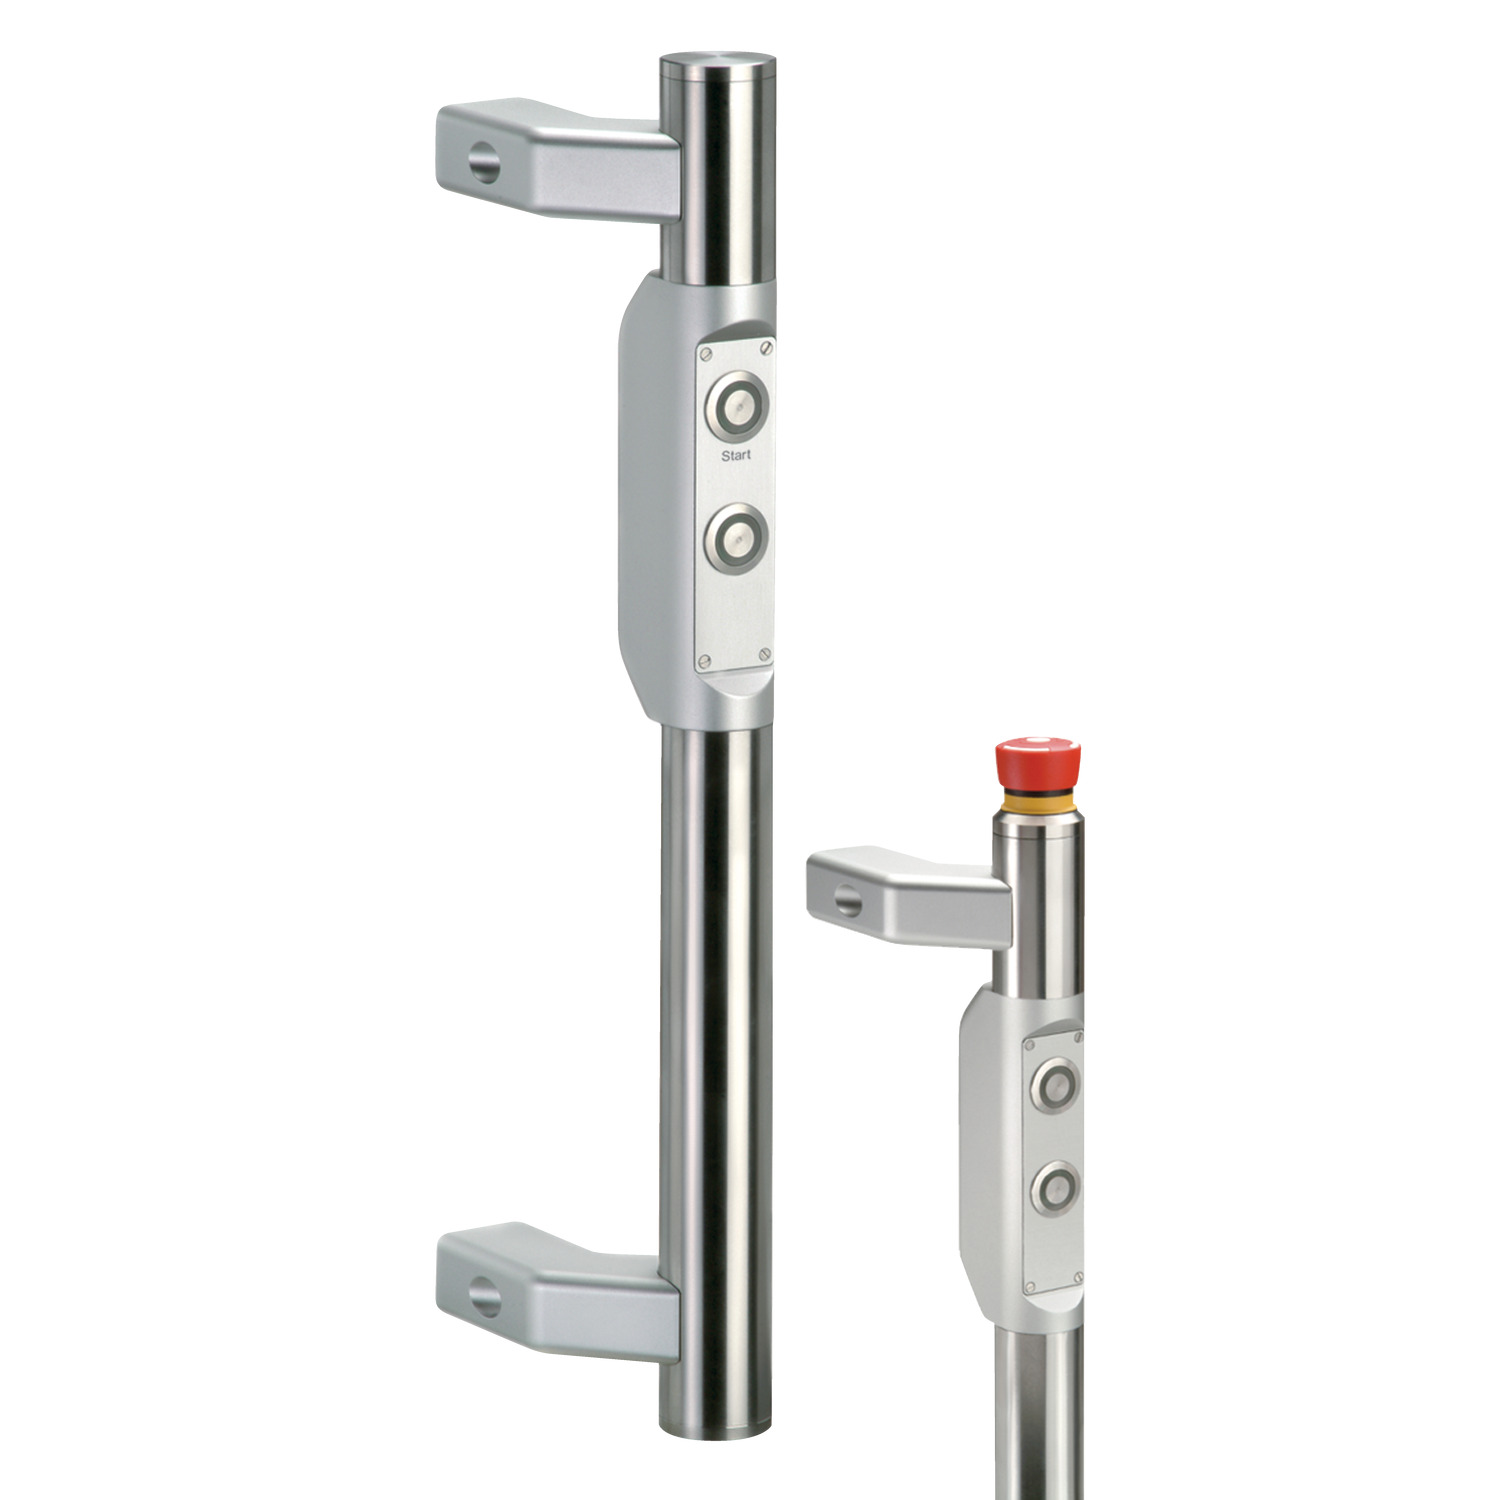 B8120.AC0122 Functional Handle - Electronic Type Two - Left. 2 Push Buttons - 8-pole (M12 x 1)